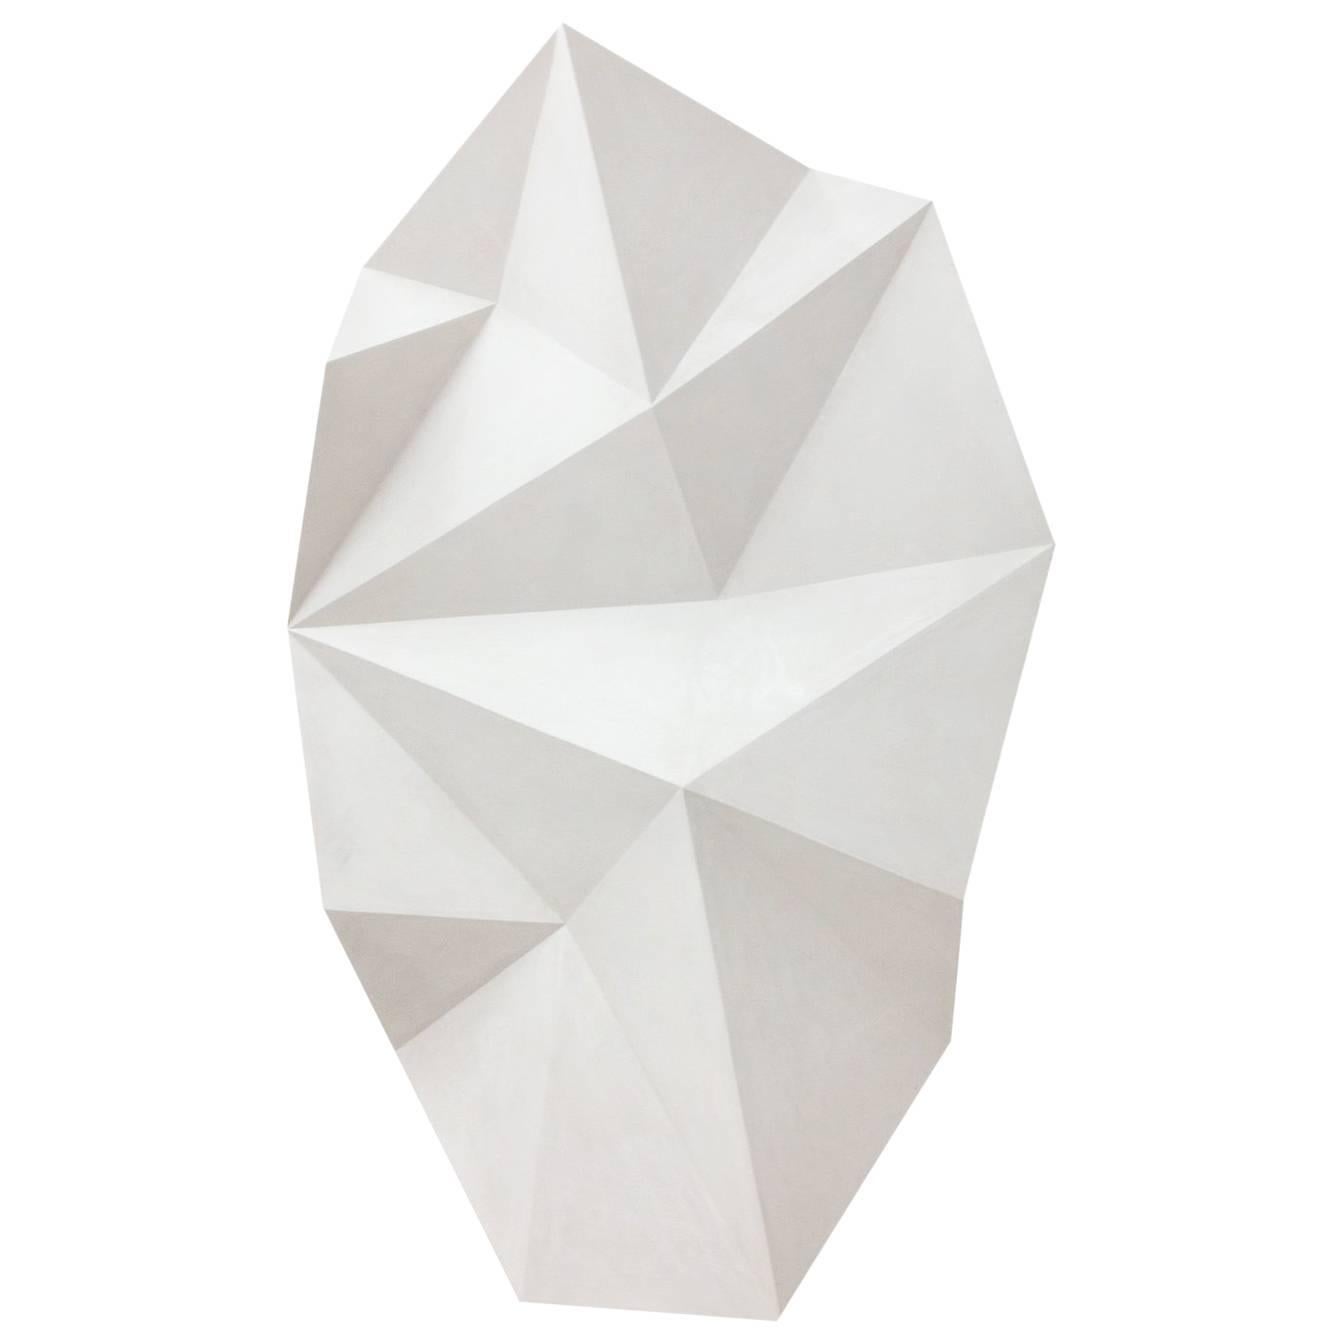 Handmade White Origami Fold Sculpture Cast Hydrostone Wall Mounted For Sale